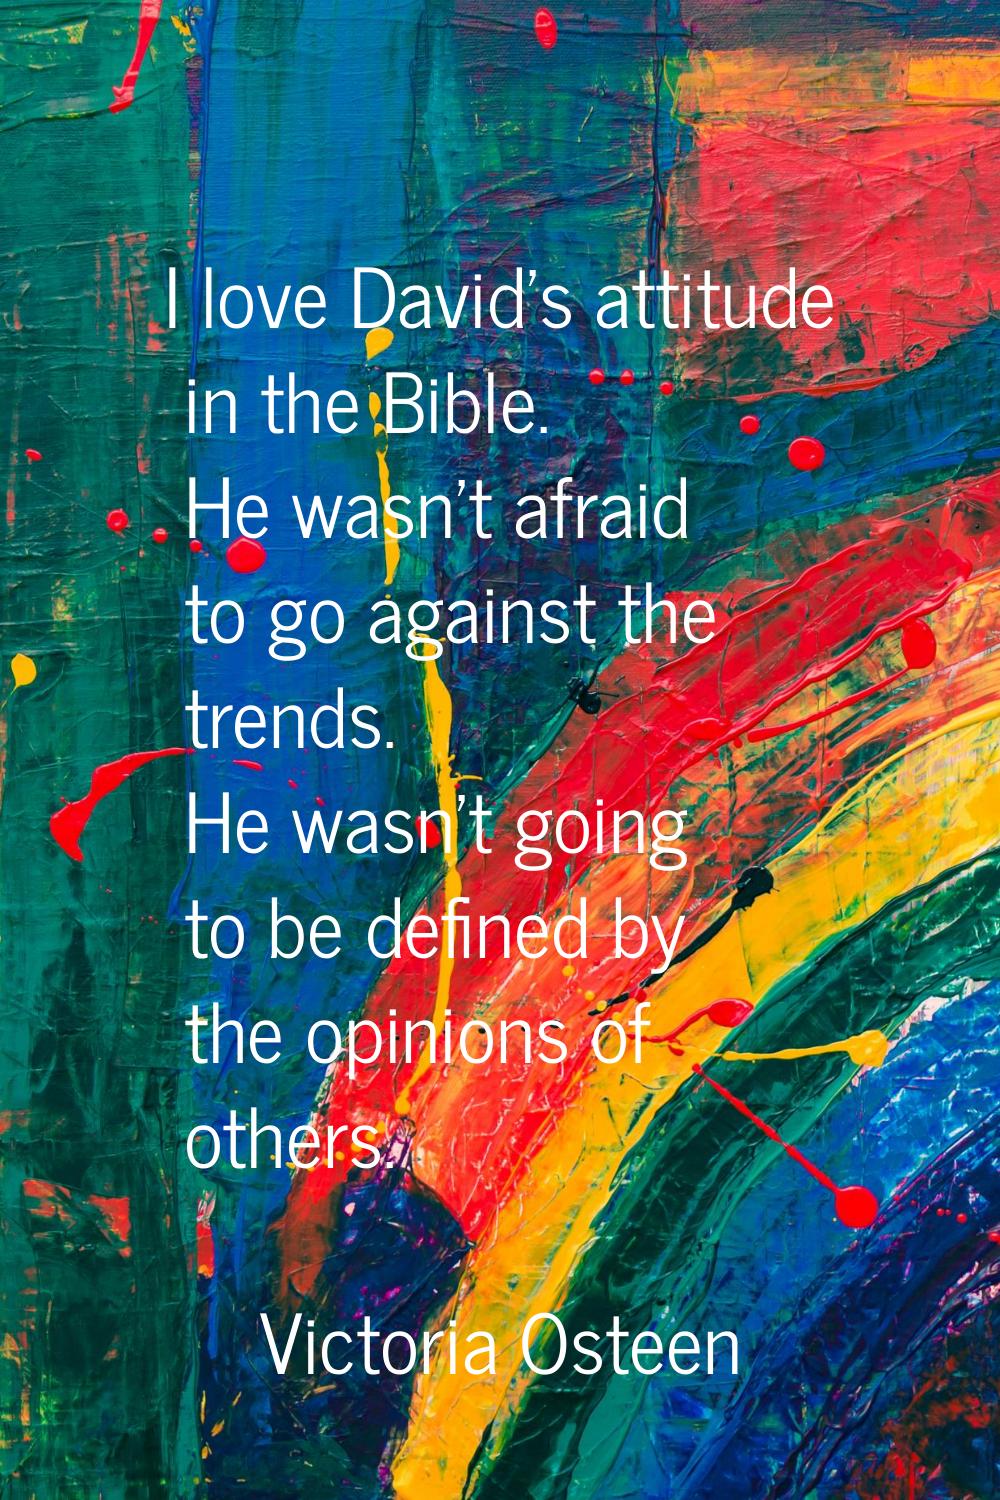 I love David's attitude in the Bible. He wasn't afraid to go against the trends. He wasn't going to